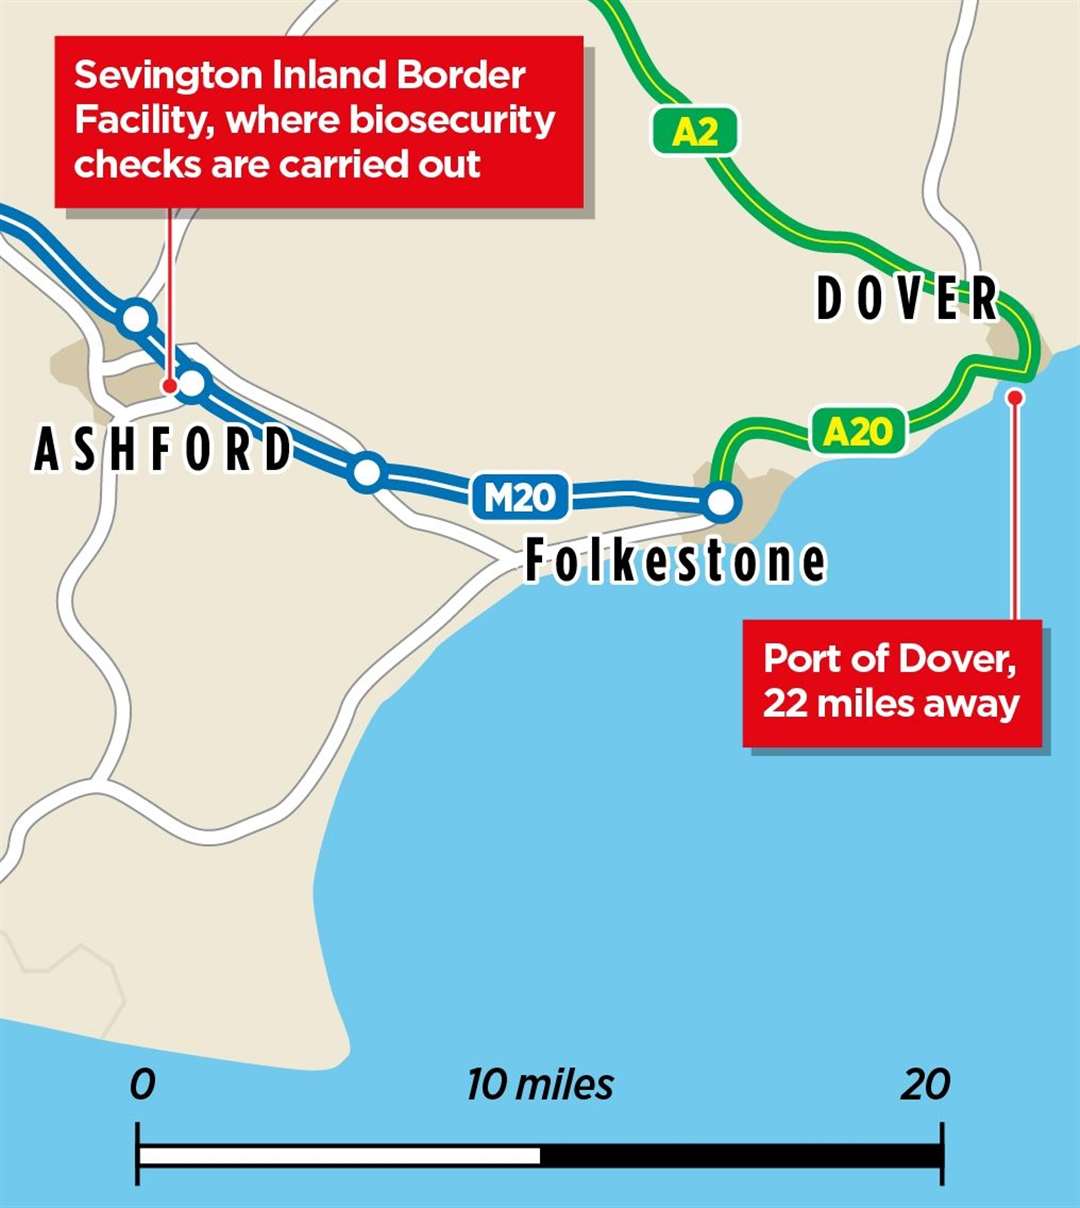 Twenty-two miles separate the Port of Dover and Sevington Inland Border Facility, where the Sevington Border Control Post is based